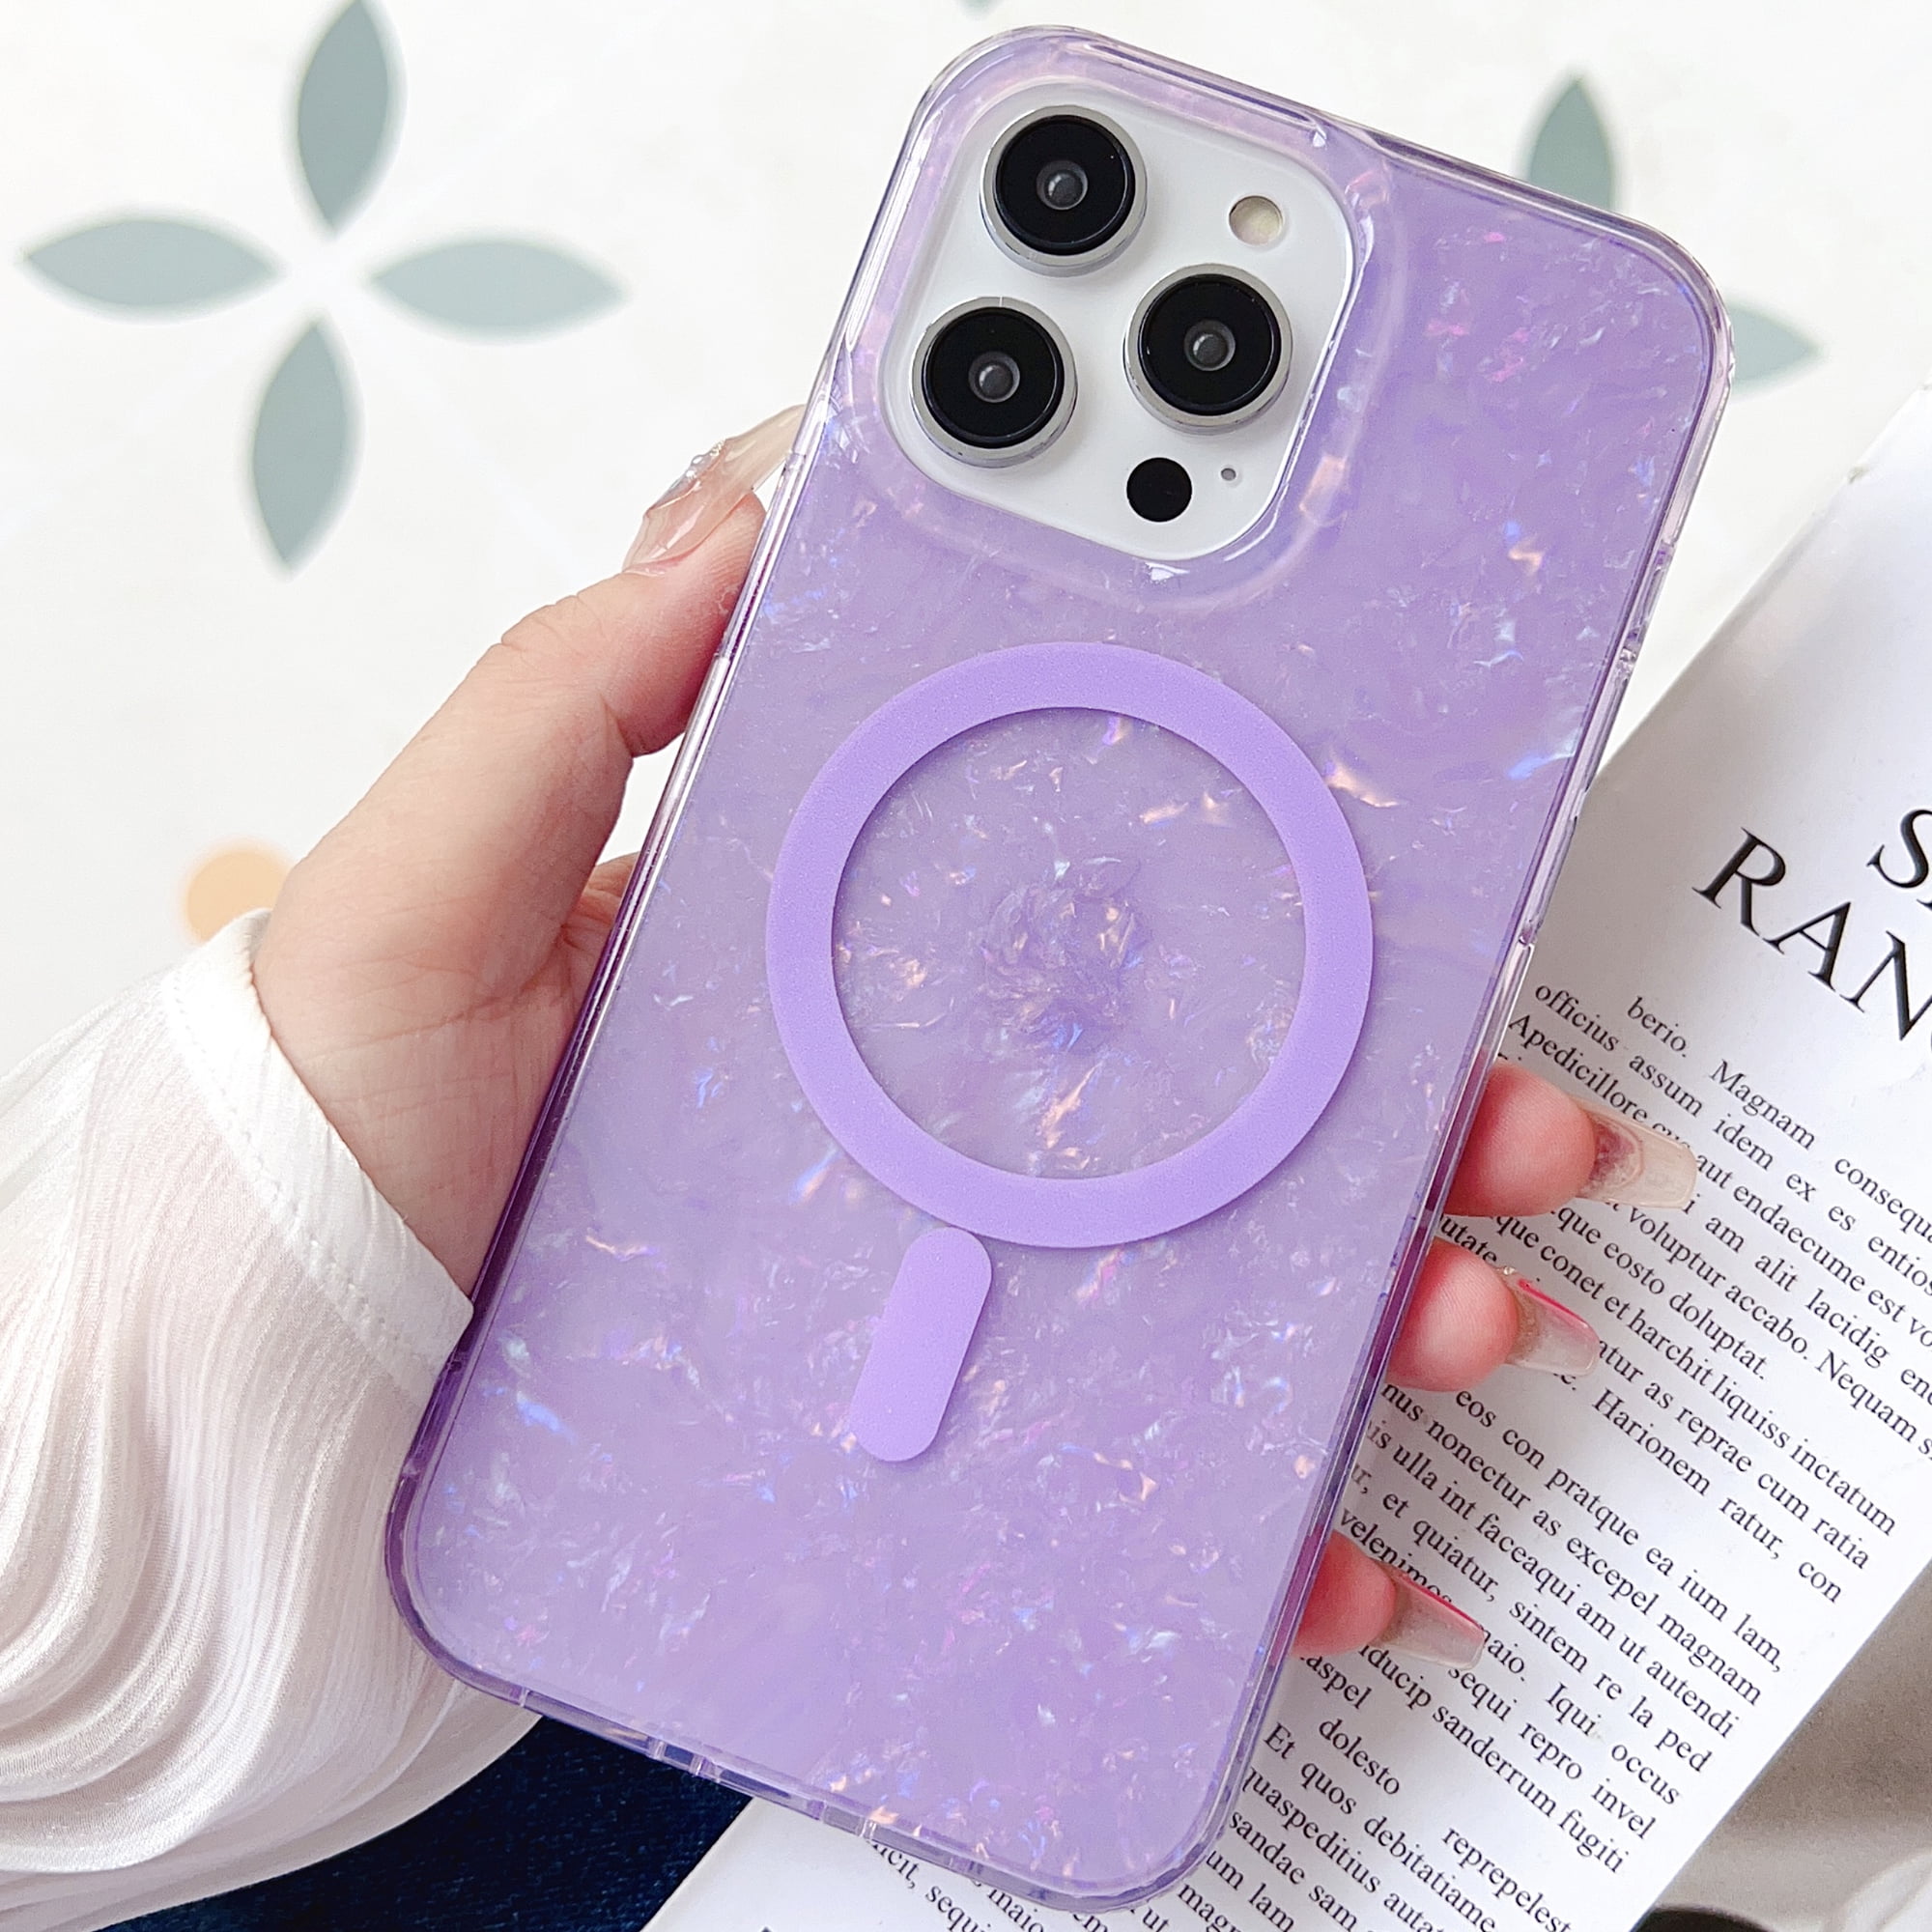 Magnetic Case for iPhone 14 Pro Max Sparkle Glitter Shell Pattern Cover, Compatible with MagSafe Wireless Charging, TPU Shockproof Non-Yellowing Slim Lightweight Case for iPhone 14 Pro Max,Purple